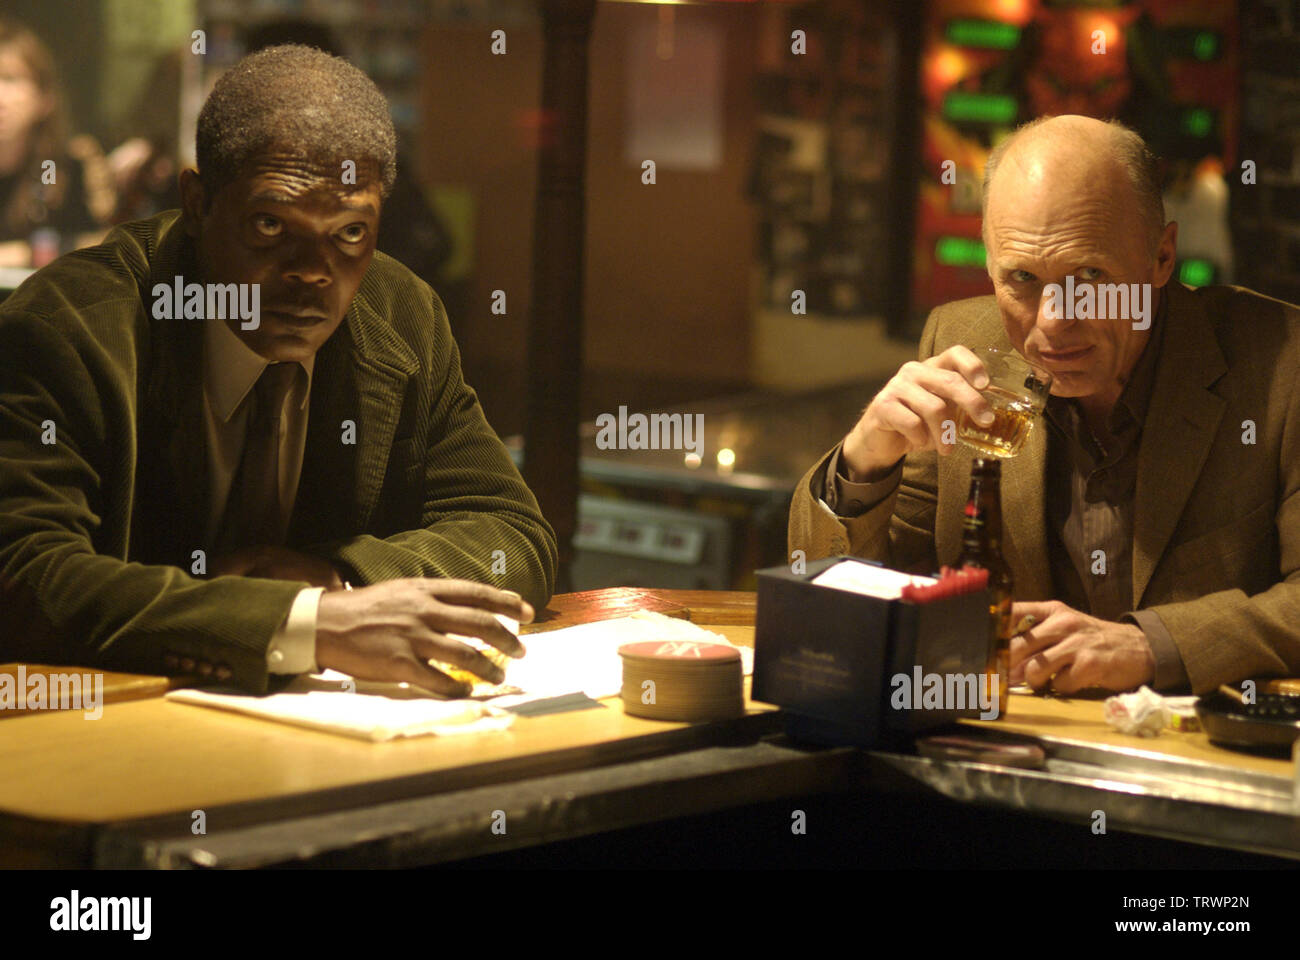 ED HARRIS and SAMUEL L. JACKSON in CLEANER (2007). Copyright: Editorial use only. No merchandising or book covers. This is a publicly distributed handout. Access rights only, no license of copyright provided. Only to be reproduced in conjunction with promotion of this film. Credit: ANONYMOUS CONTENT / Album Stock Photo